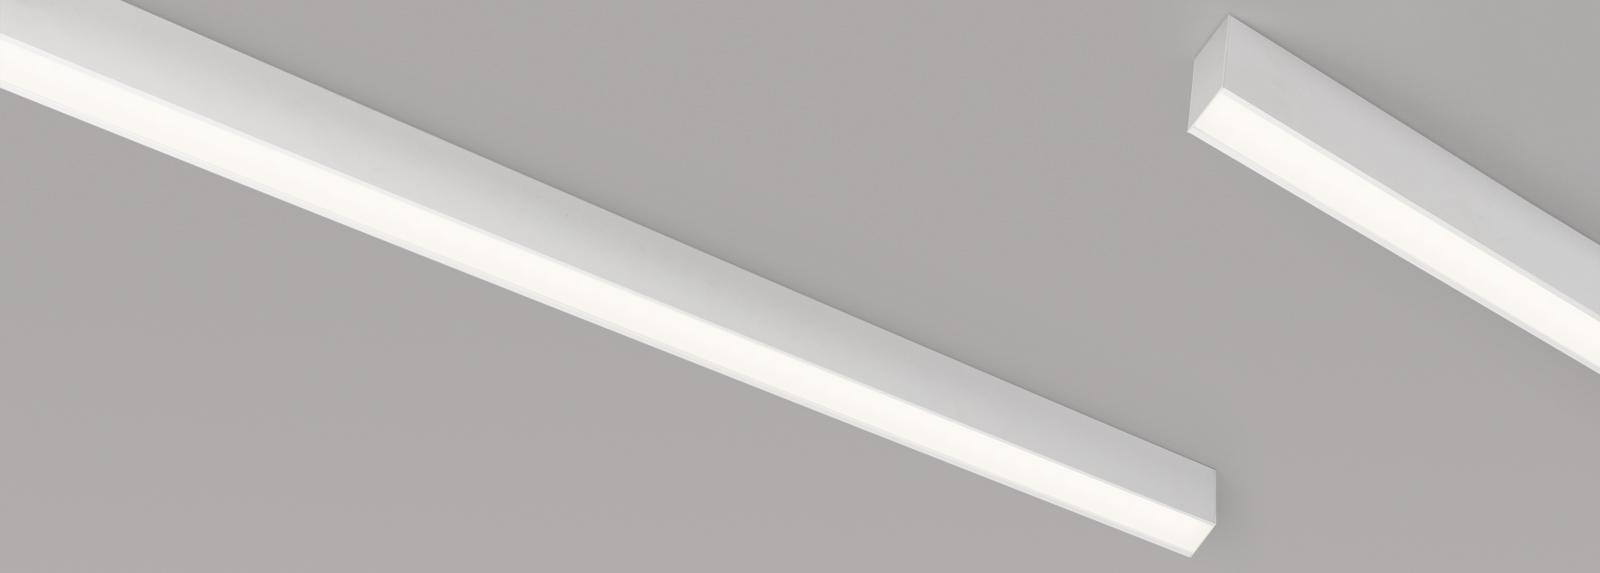 TIRET 300 | Surface-mounted linear downlights